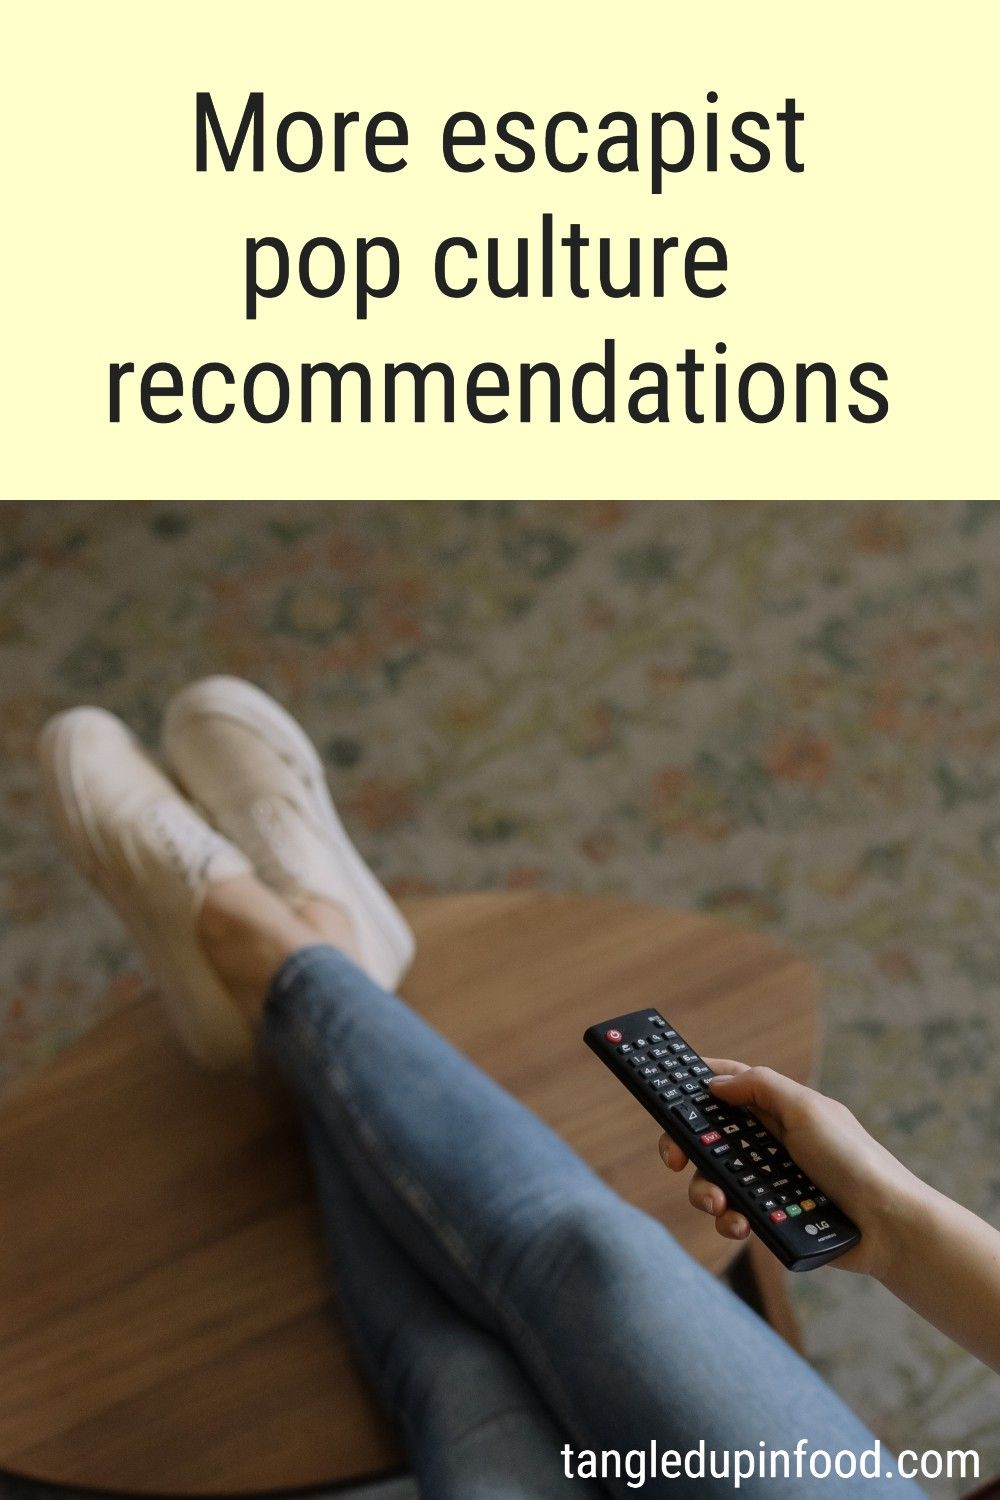 Legs propped up on coffee table and hand holding remote with text reading "More escapist pop culture recommendations"